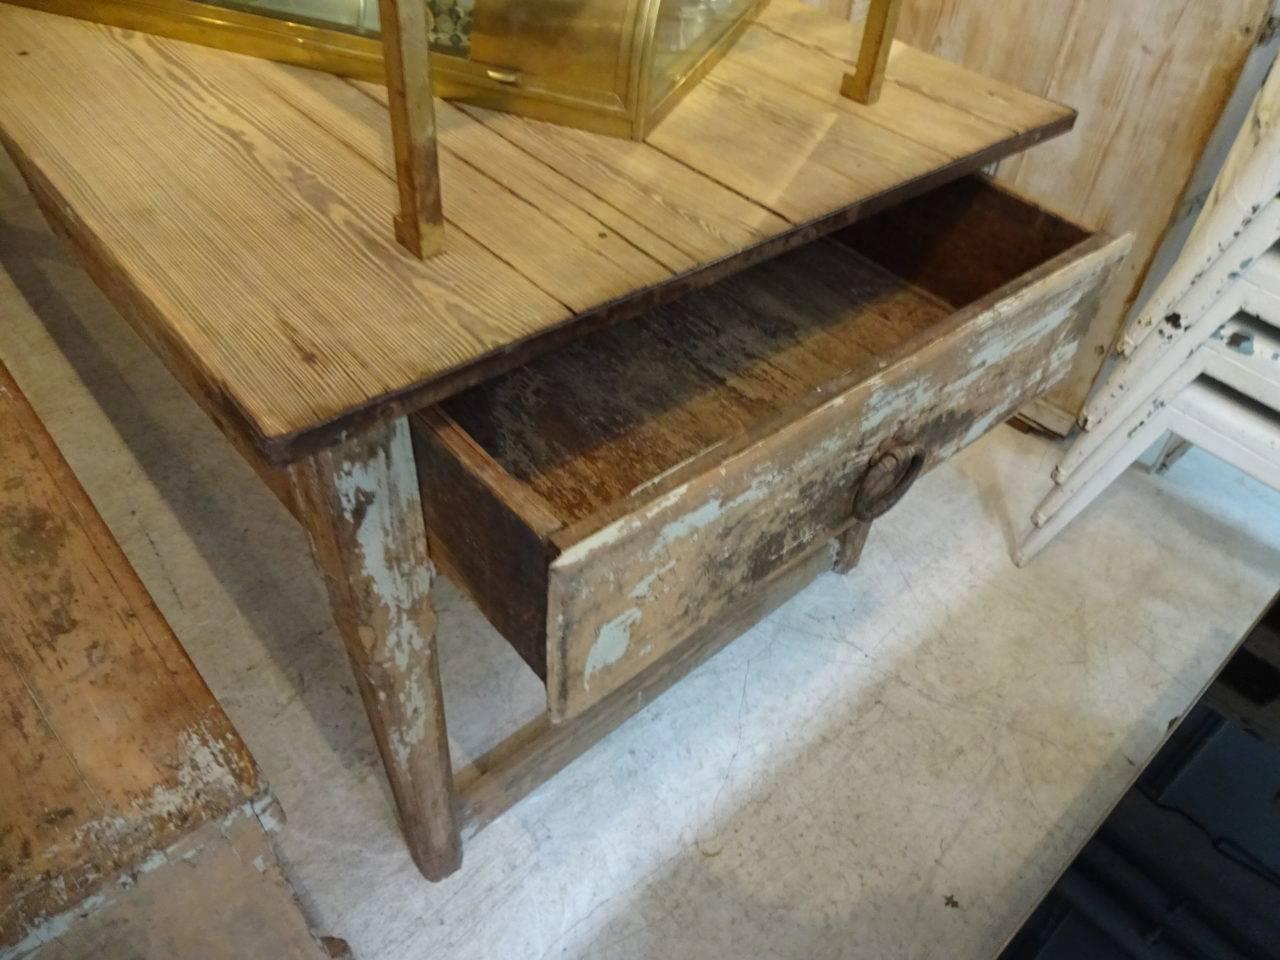 Beautiful rustic vintage rectory table, from the South of France. Stands firmly on six legs and has a genuine luscious weathered patina and a large and practical drawer at one end. The long gorgeous wooden bench belongs with it. This is the longest